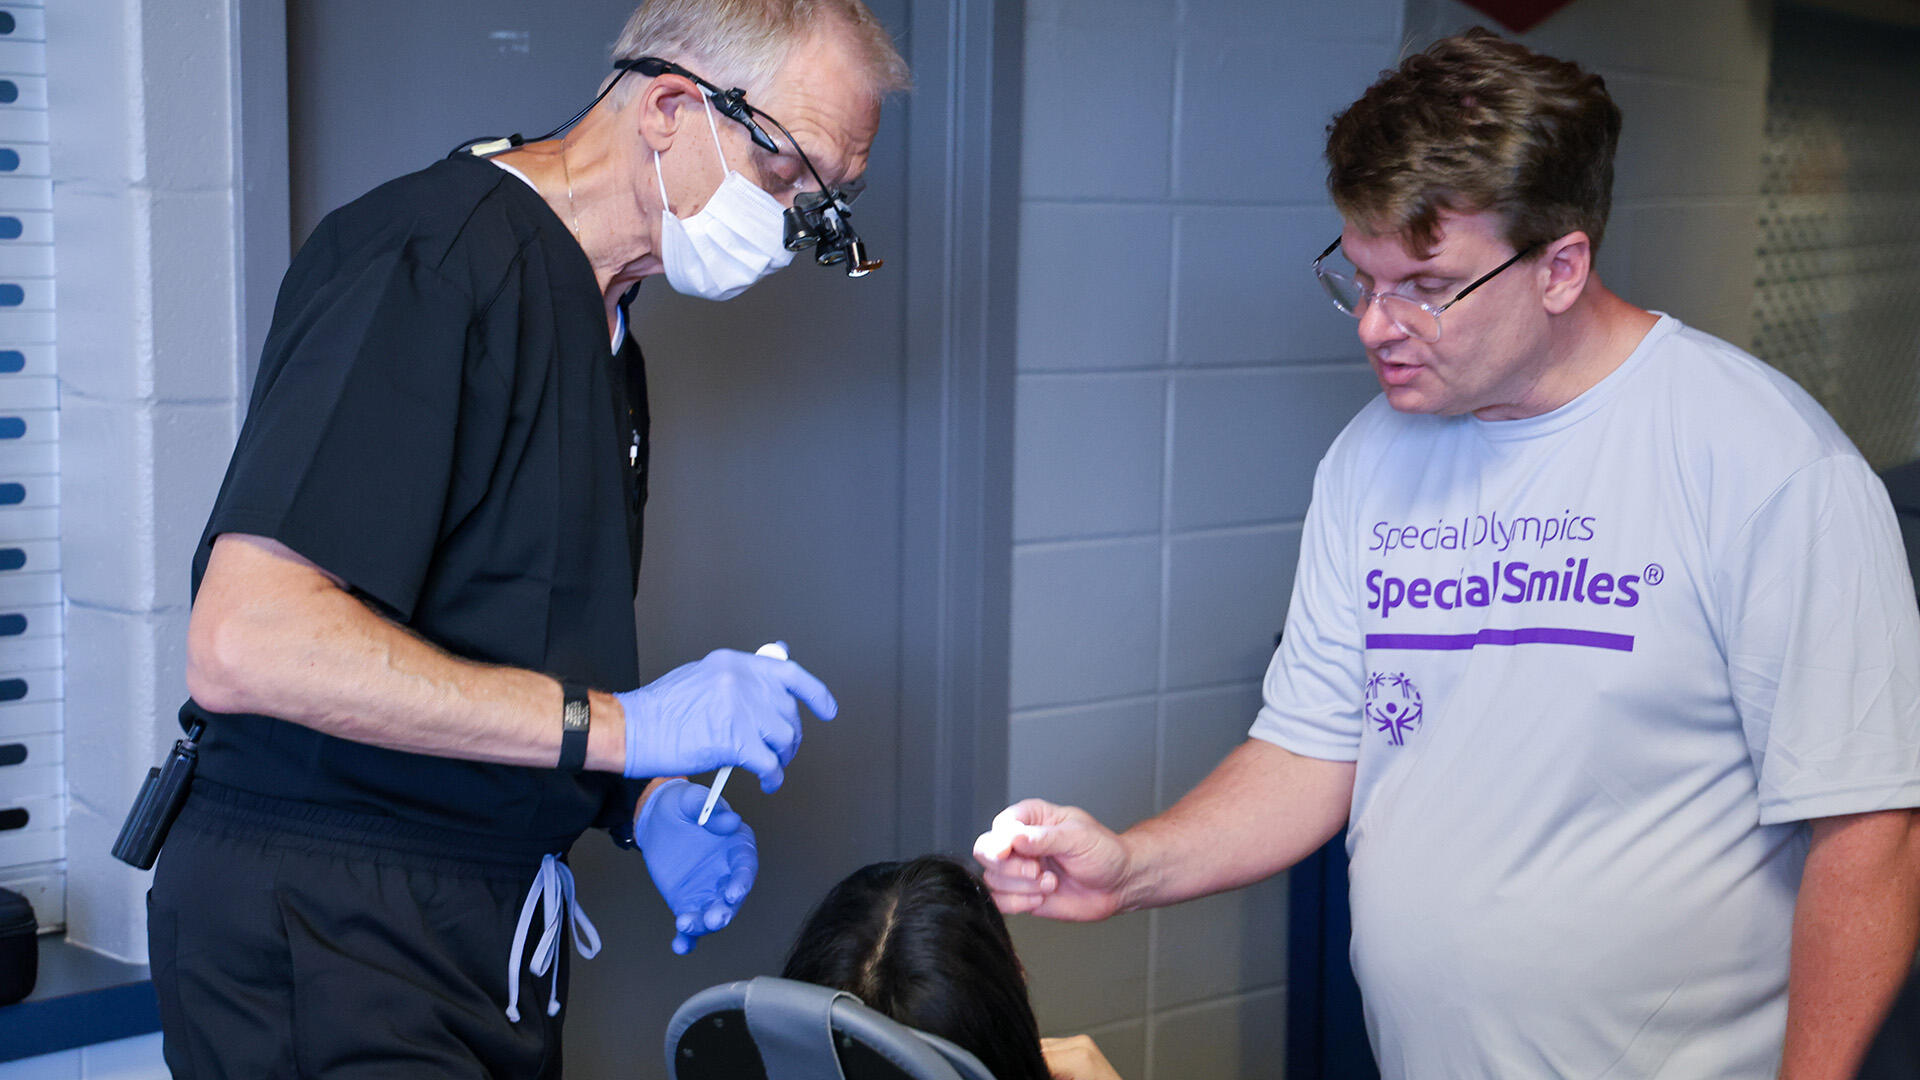 A photo of two men standing over a person in a dental chair. The man on the left is wearing dental scrubs, blue latex gloves, a face mask, and magnifying glasses. The man on the right is wearing glasses and a t-shirt that says \"Special Olympics Special Smiles\" in purple text. 